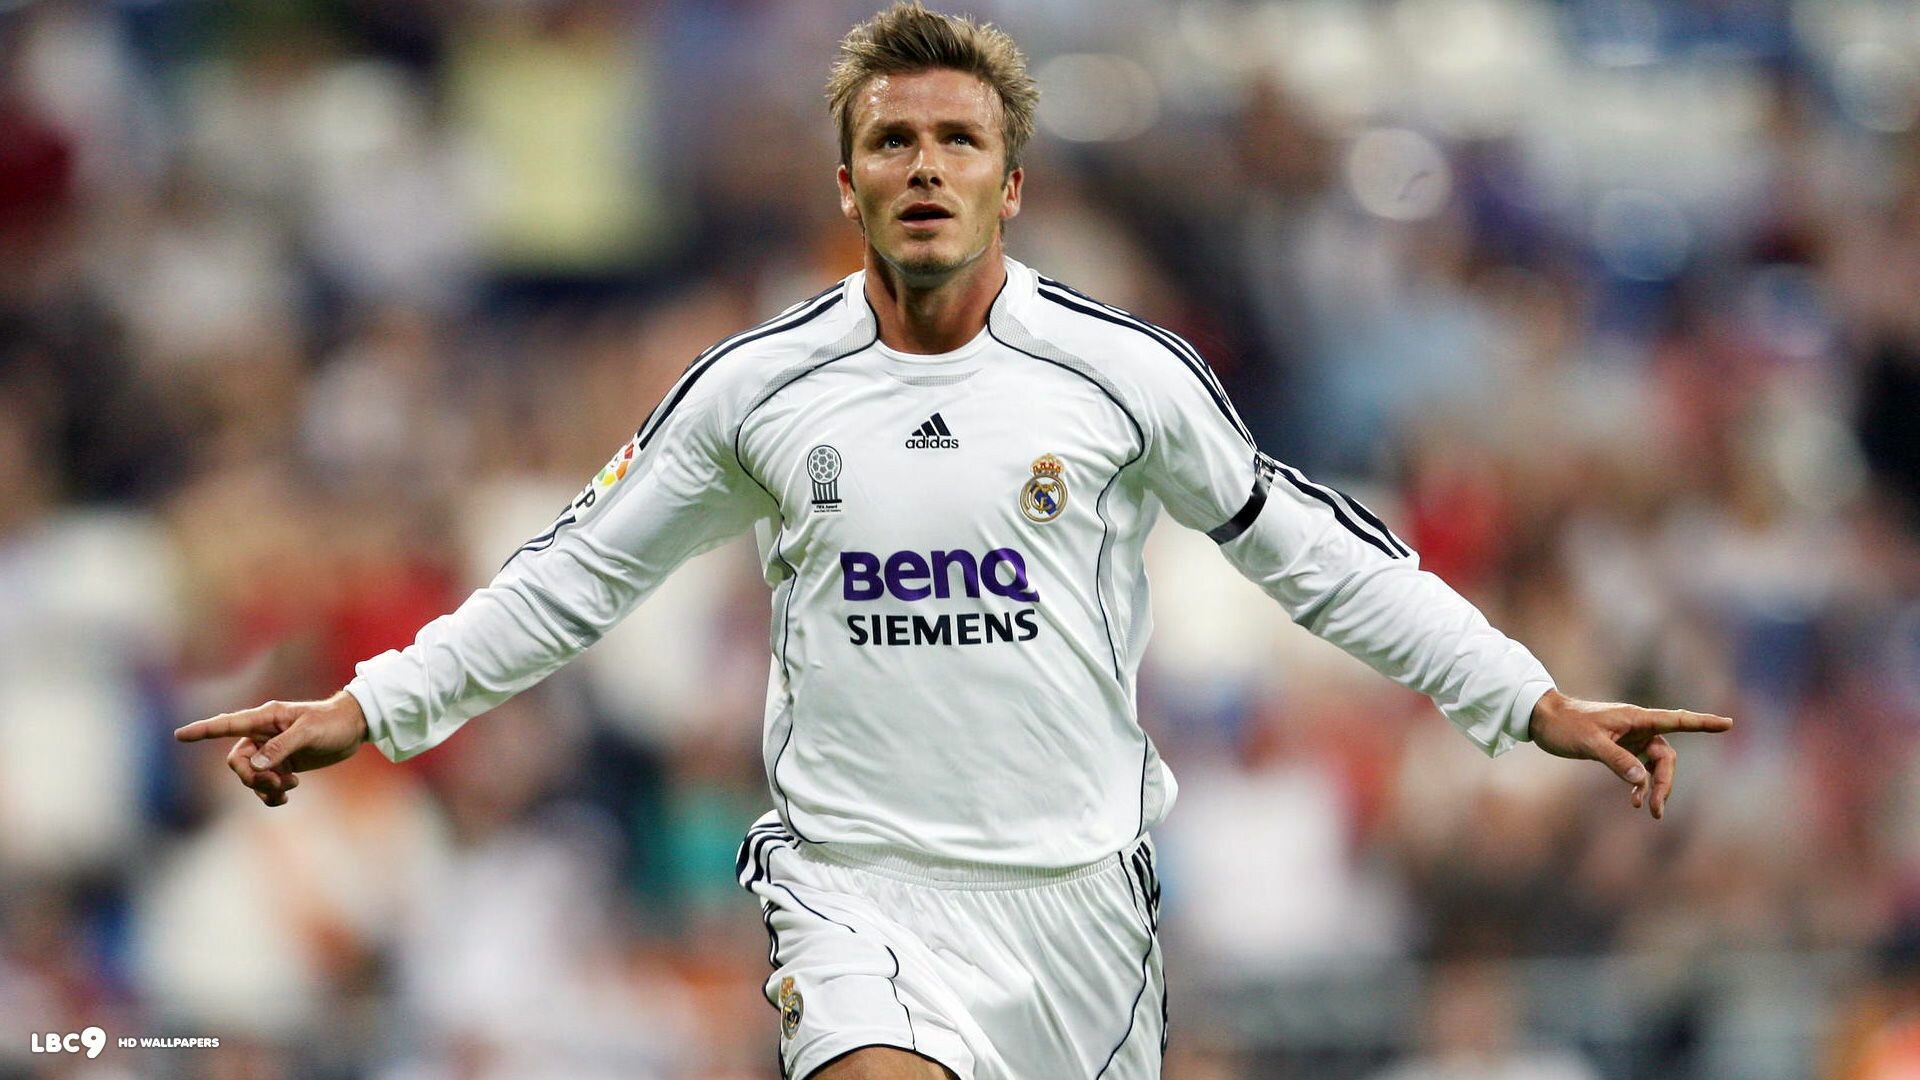 David Beckham: Real Madrid, Scored his first goal in Serie A for Milan in a victory over Bologna on 25 January 2009. 1920x1080 Full HD Background.